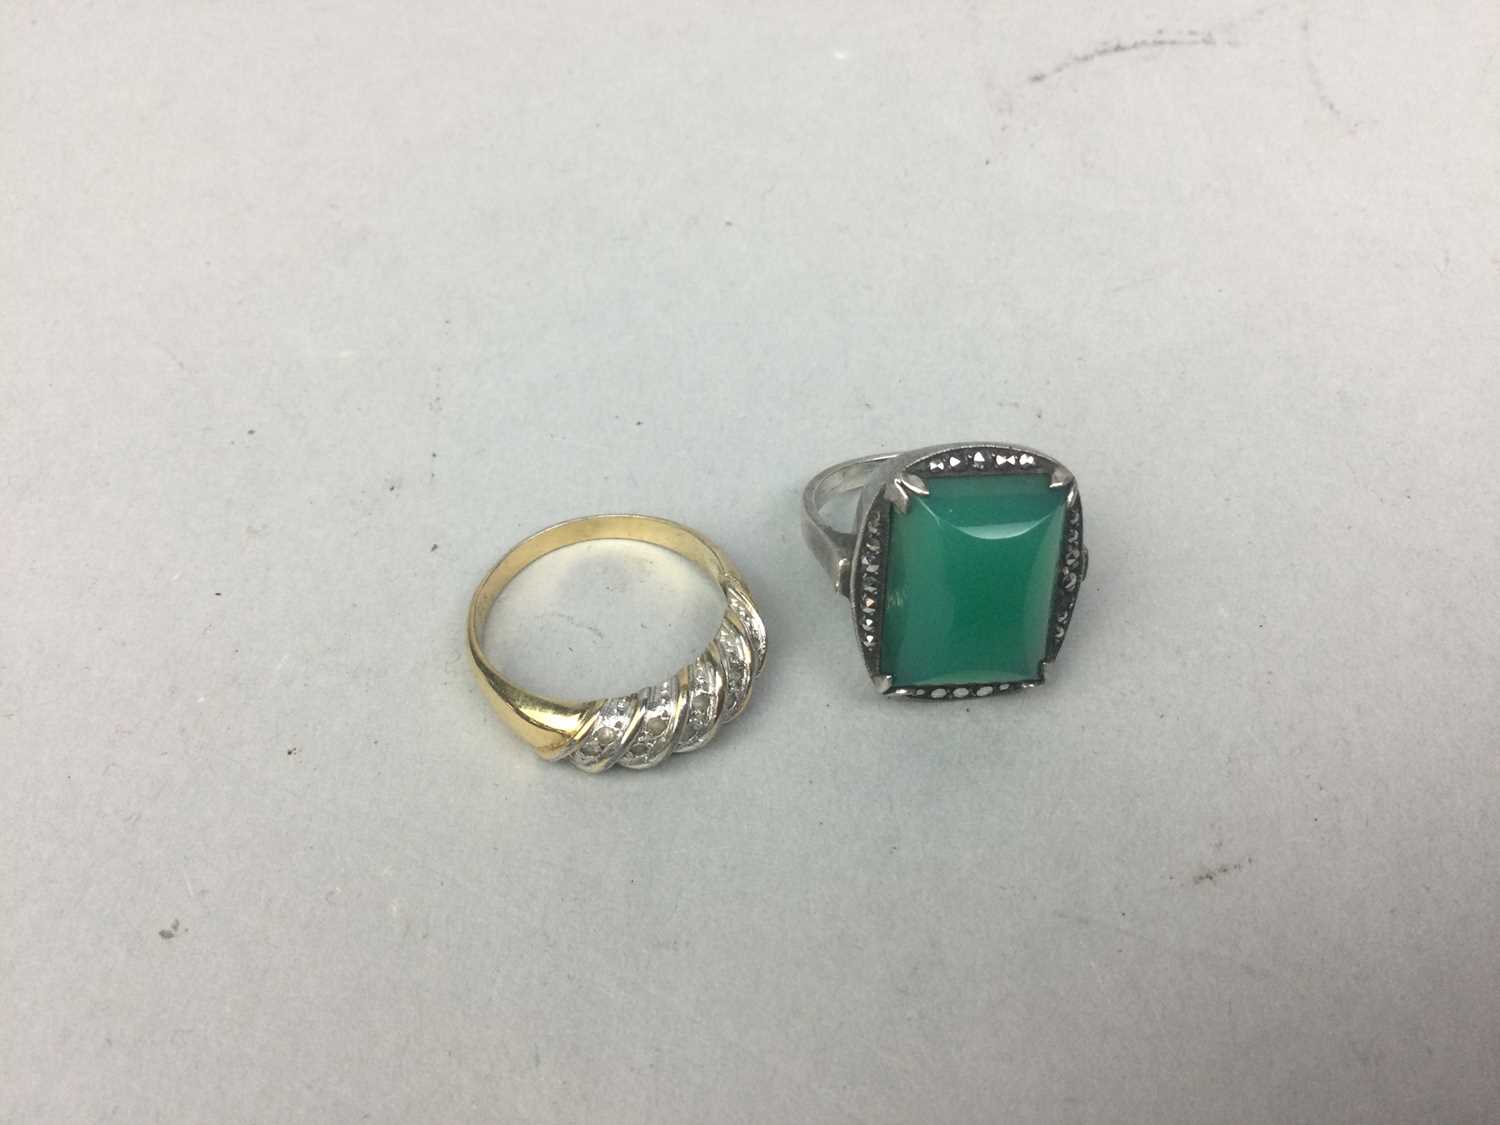 Lot 76 - AN ART DECO STYLE RING AND A DRESS RING